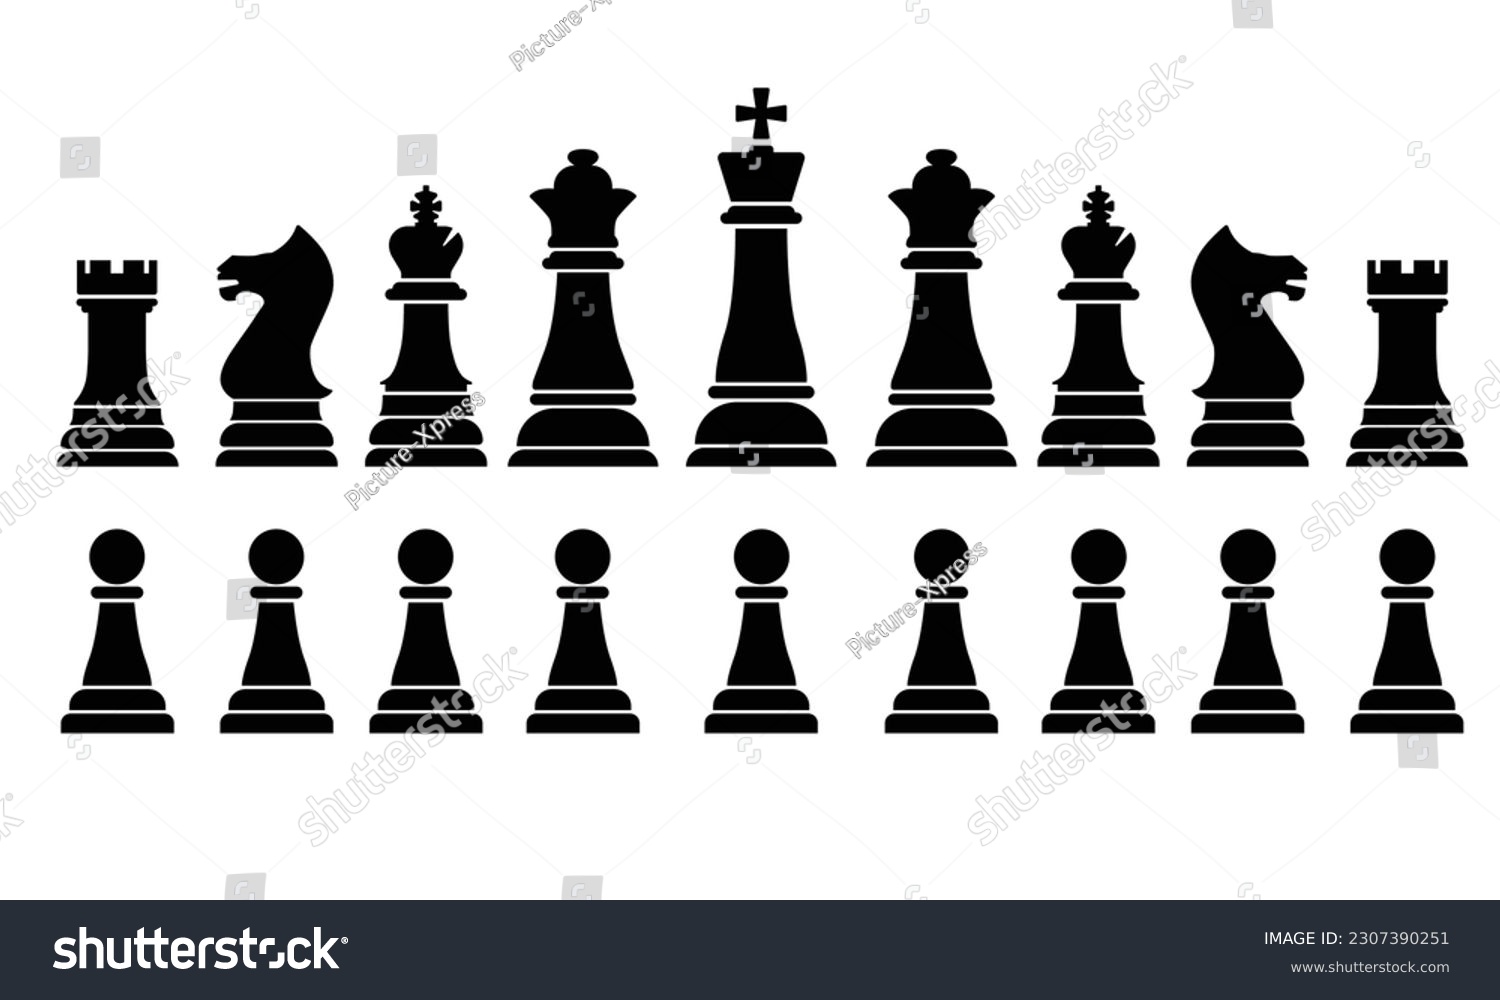 SVG of all chess icon symbol king queen bishop knight rook paw svg